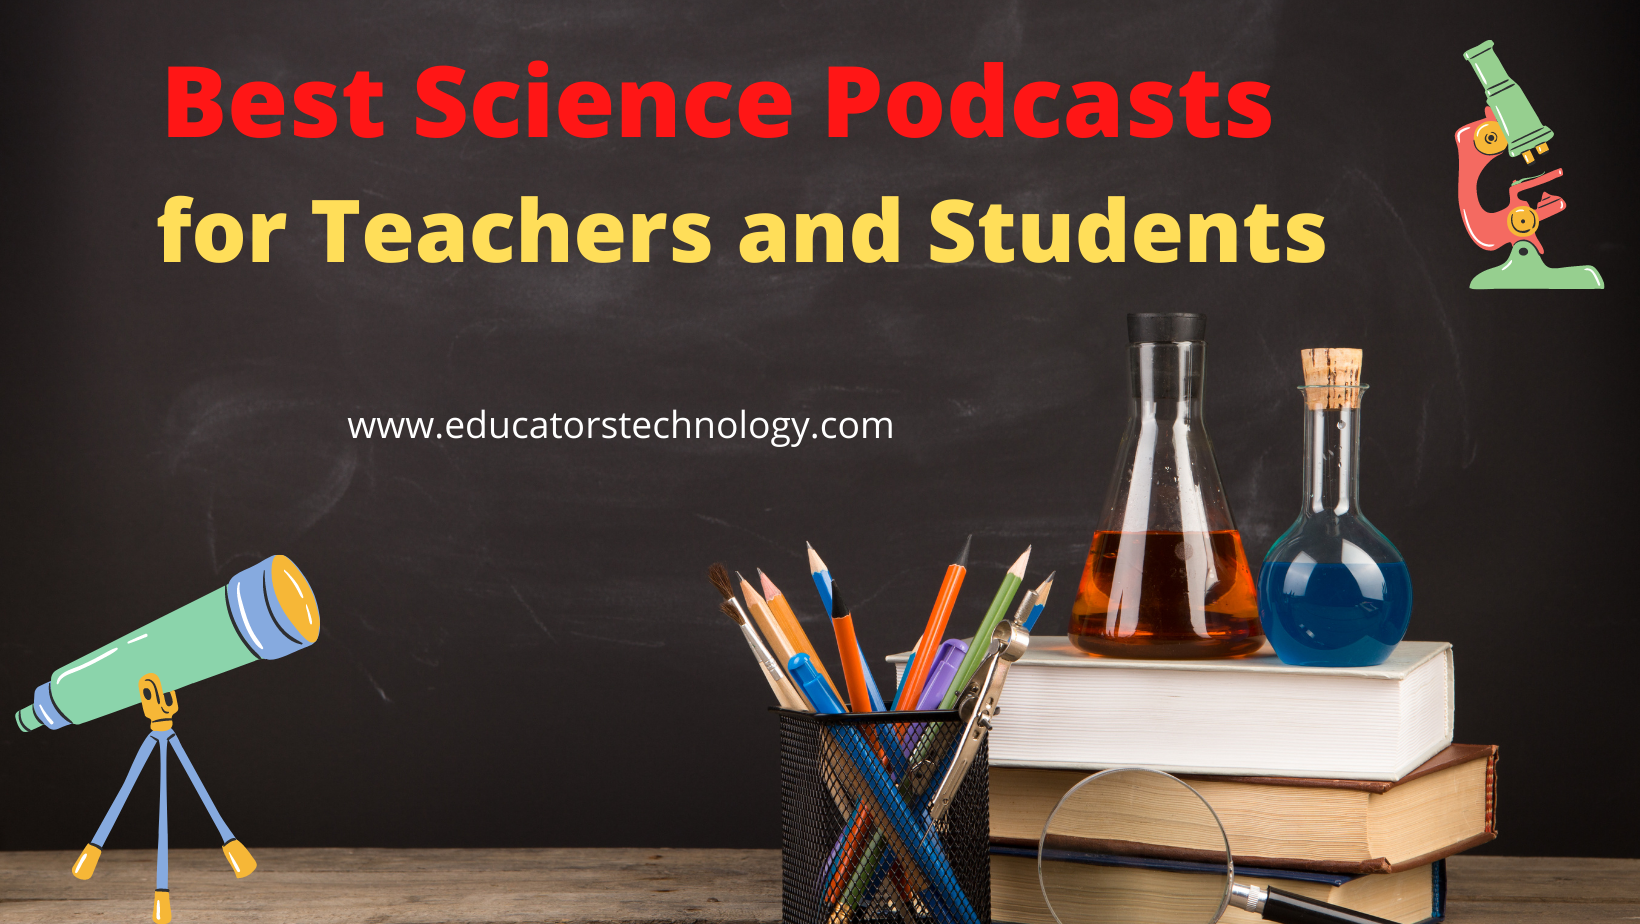 Science podcasts for teachers and students